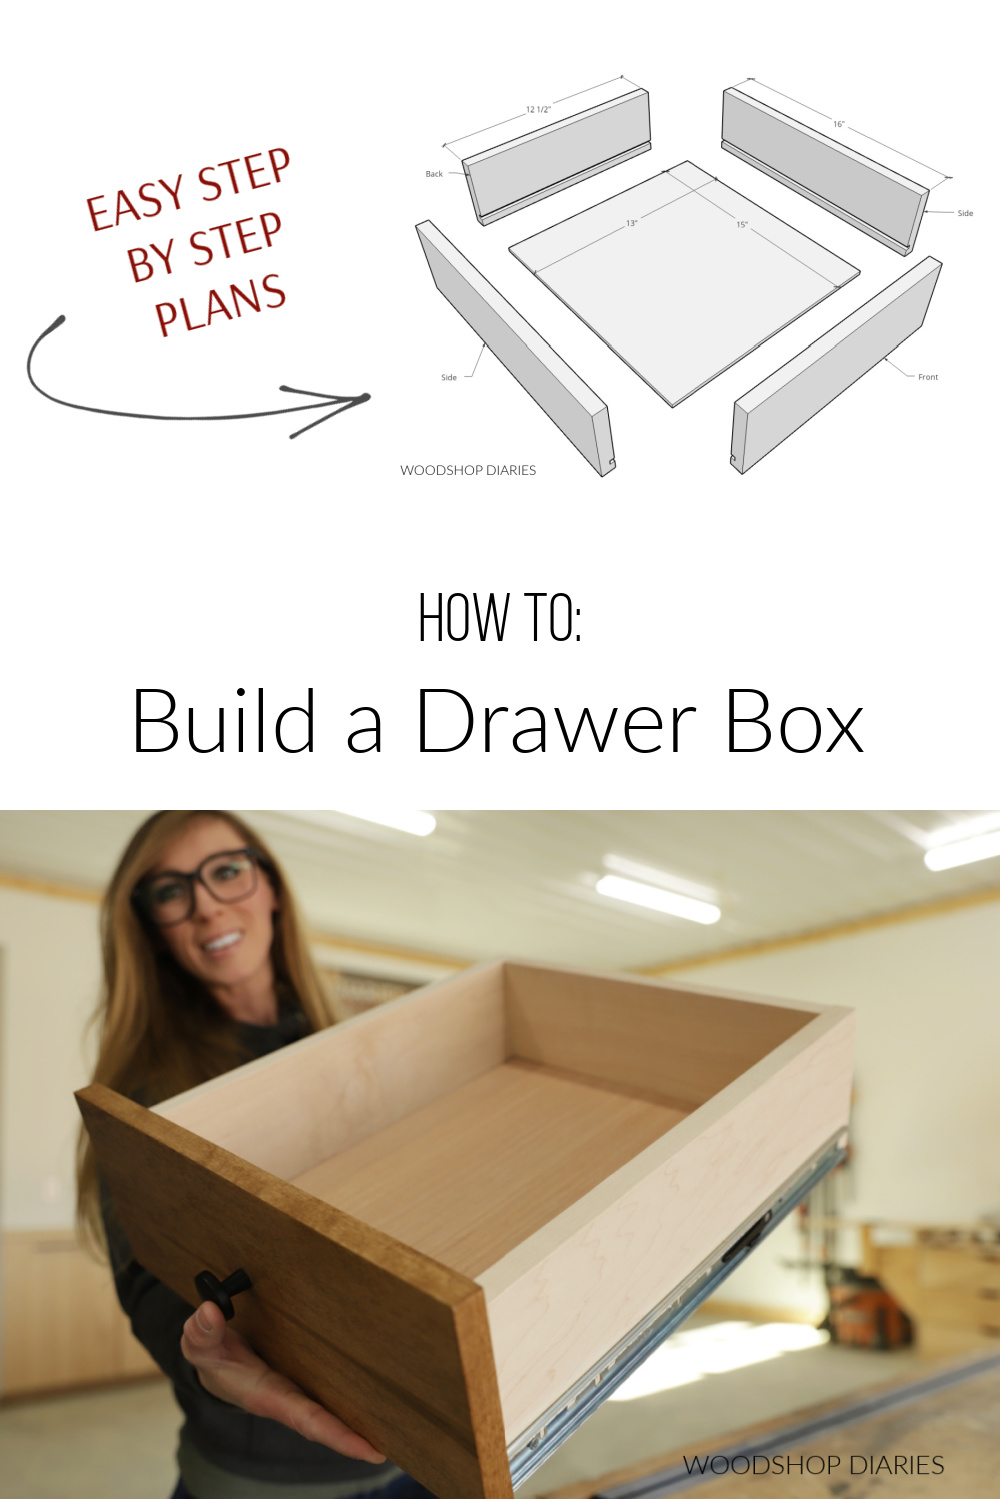 Pinterest collage image showing exploded drawer box diagram at top and Shara Woodshop Diaries holding completed drawer box at bottom with text "how to build a drawer box"